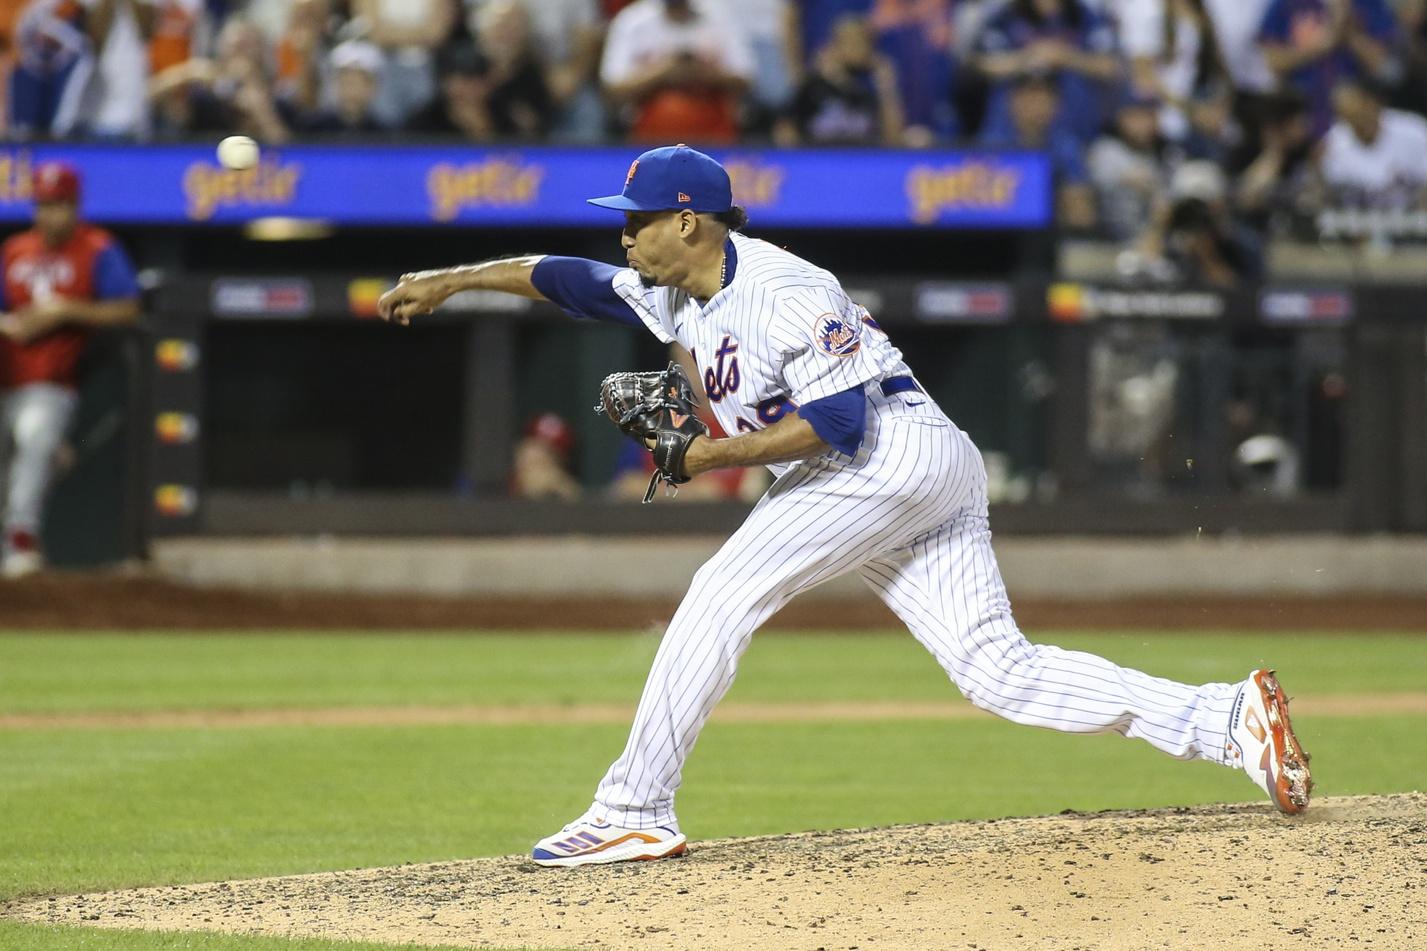 New York Mets relief pitcher Edwin Diaz (39) pitches in the ninth inning against the Philadelphia Phillies at Citi Field. / Wendell Cruz-USA TODAY Sports